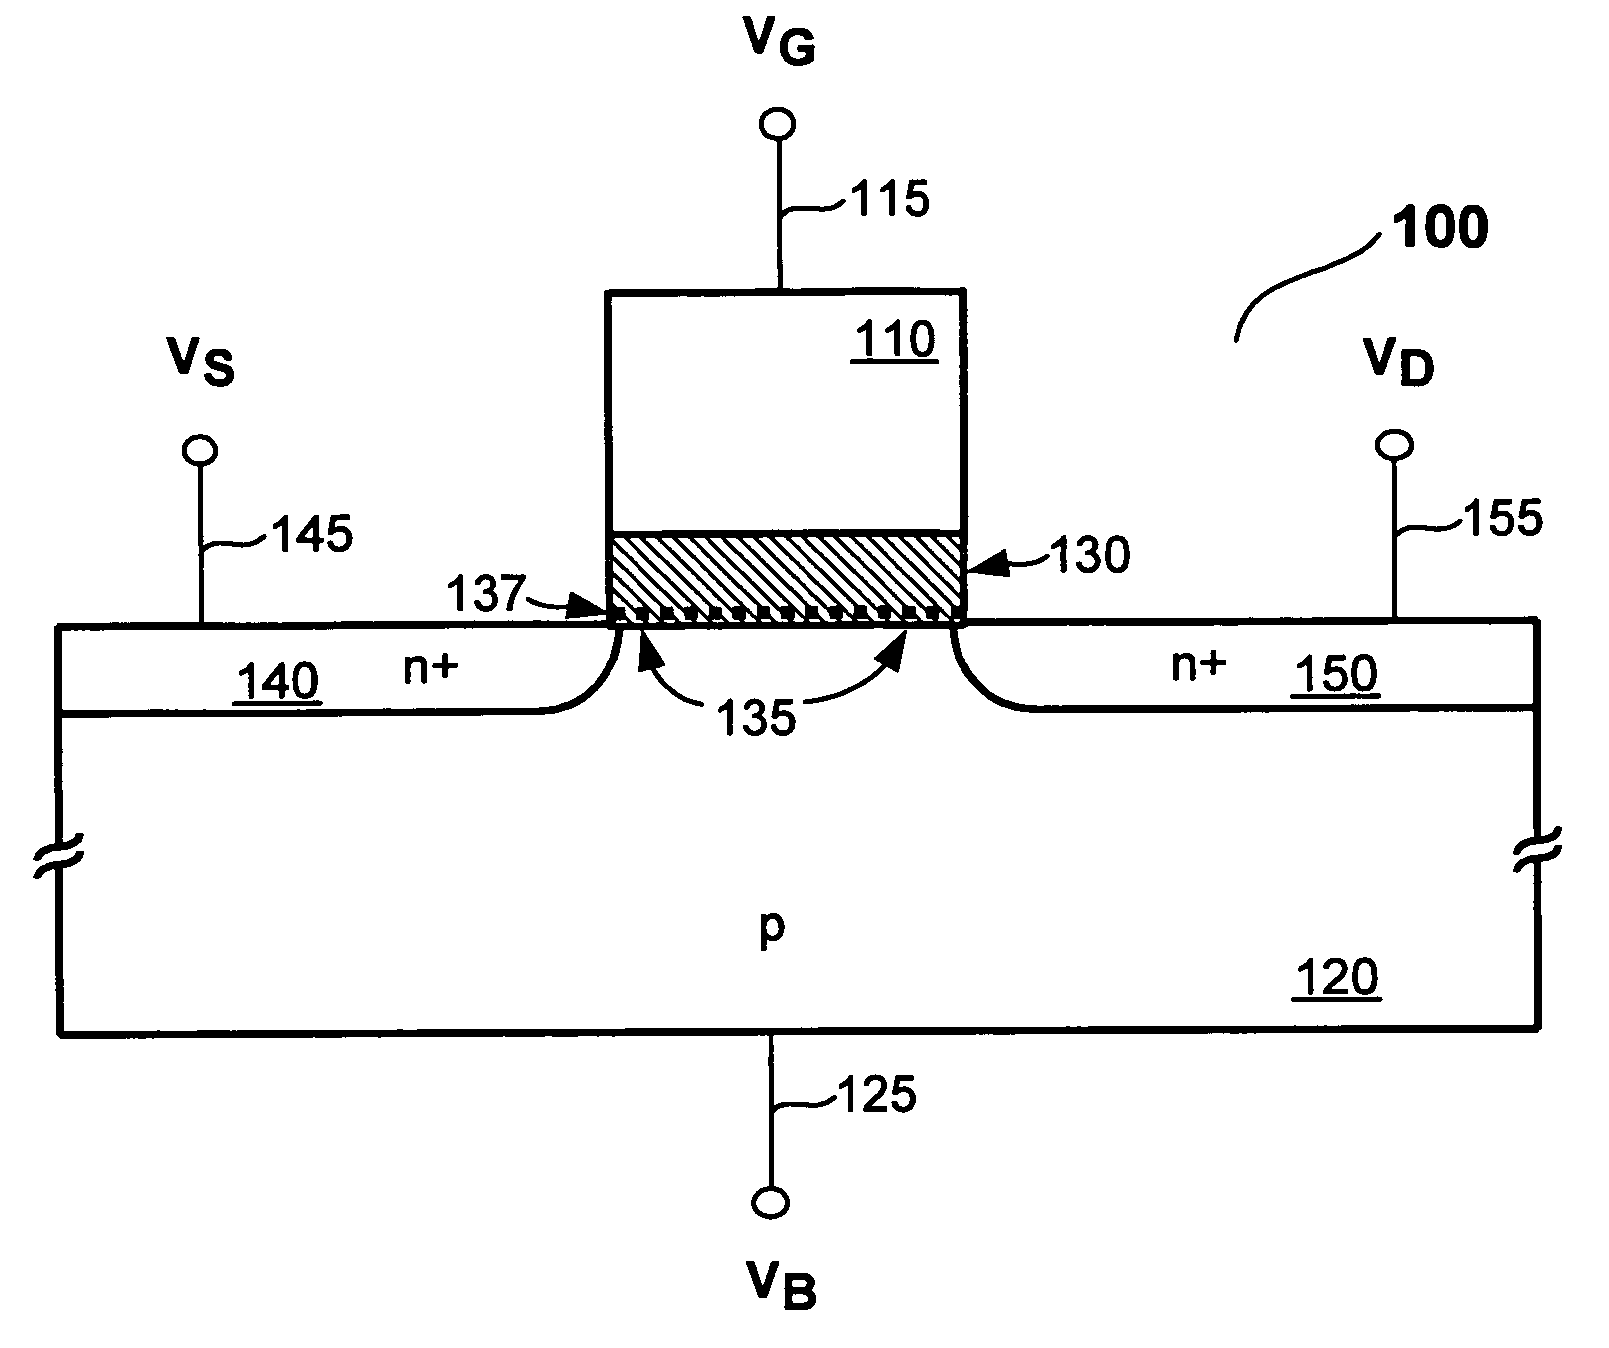 Method of forming a negative differential resistance device